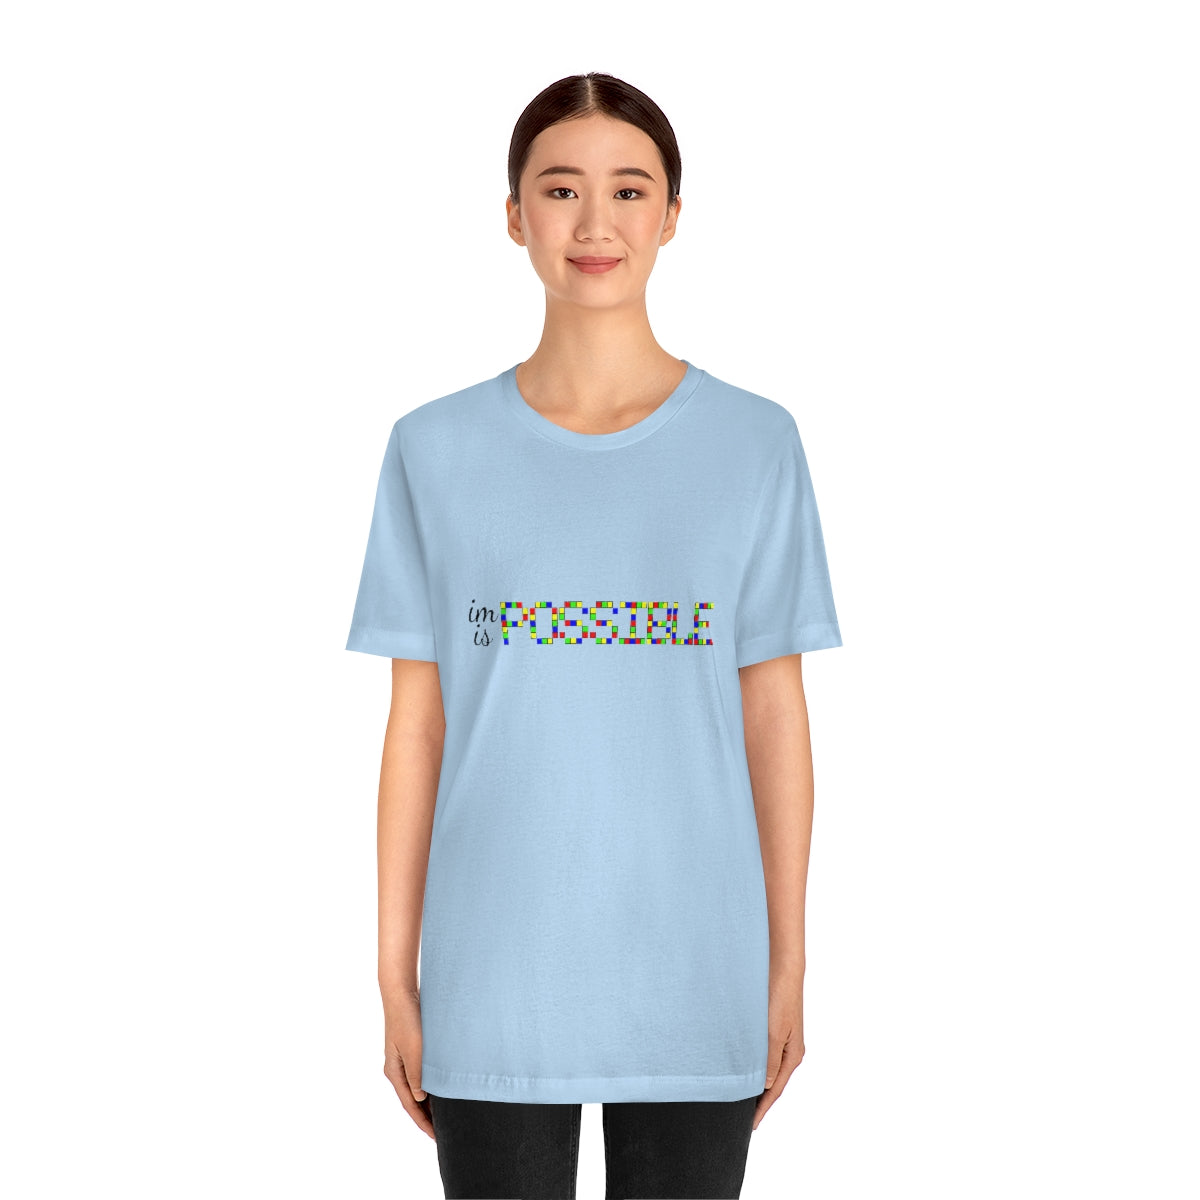 Unisex Jersey Short Sleeve Tee "Impossible is possible"